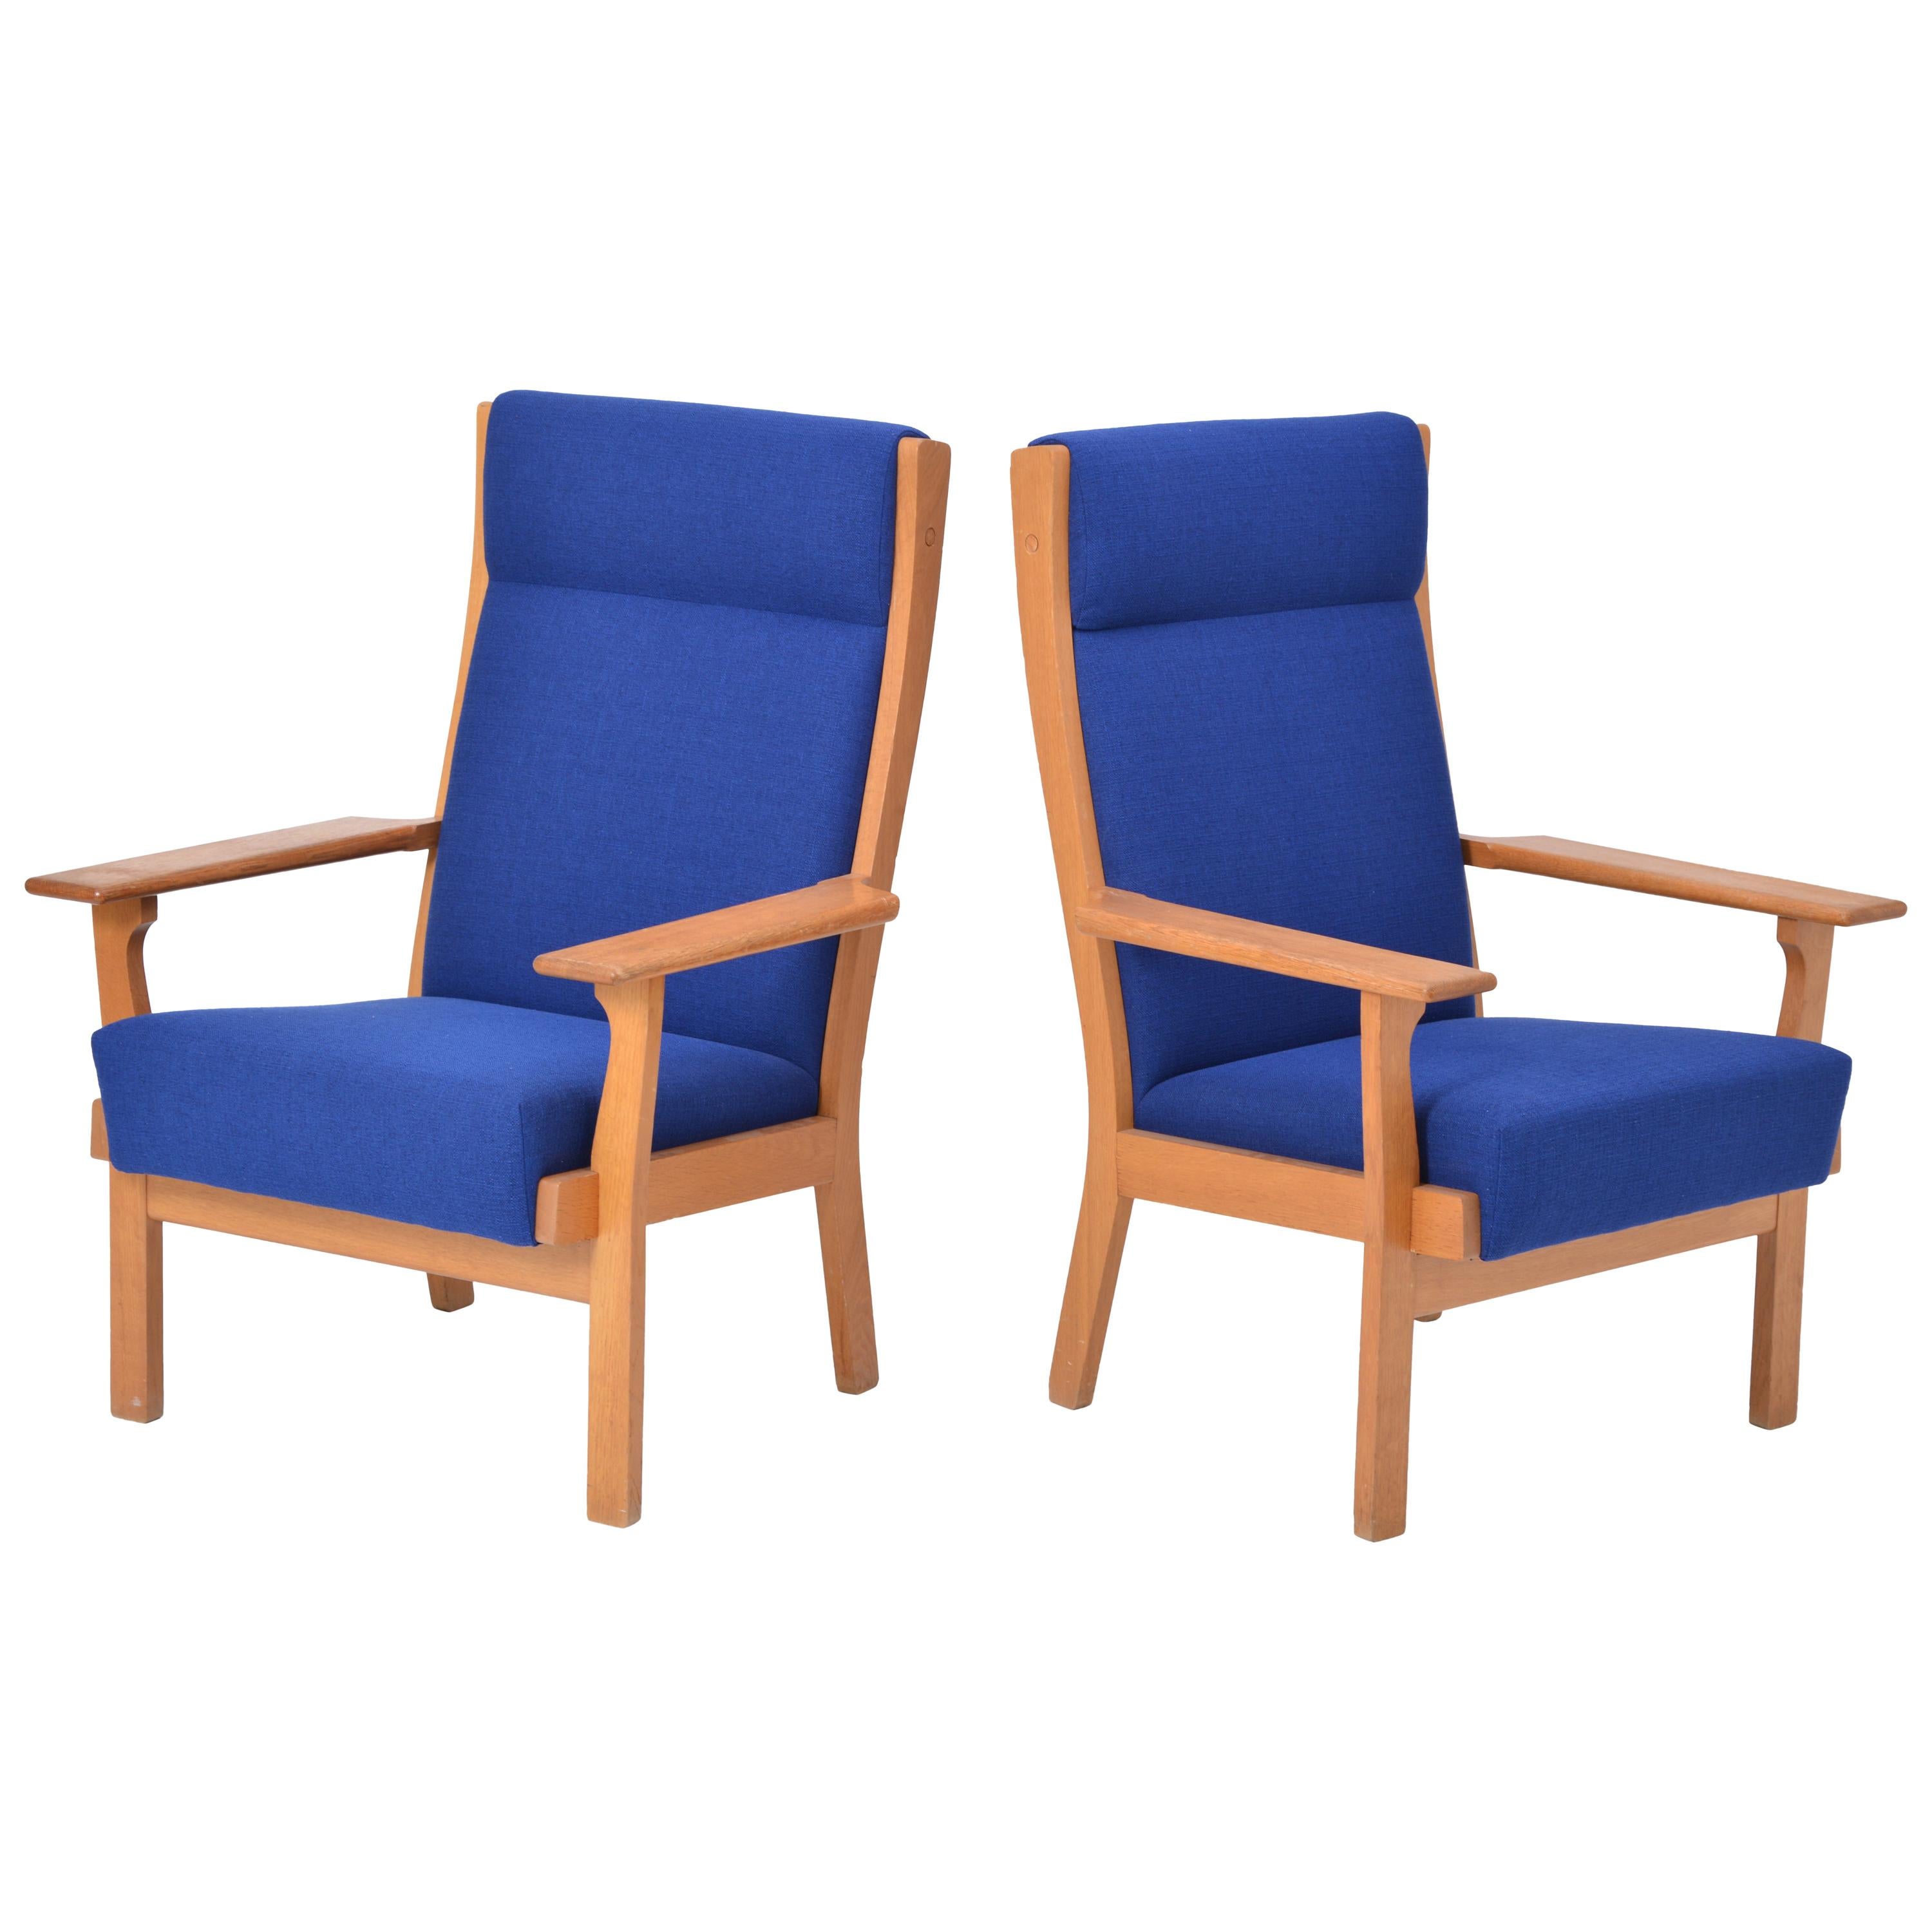 Set of two Danish Mid-Century Modern GE 181 a chairs by Hans Wegner for GETAMA

This pair of armchairs (Model GE 181 A) was designed by Hans Wegner and produced with outstanding craftsmanship by the Danish company GETAMA. The chairs are made from